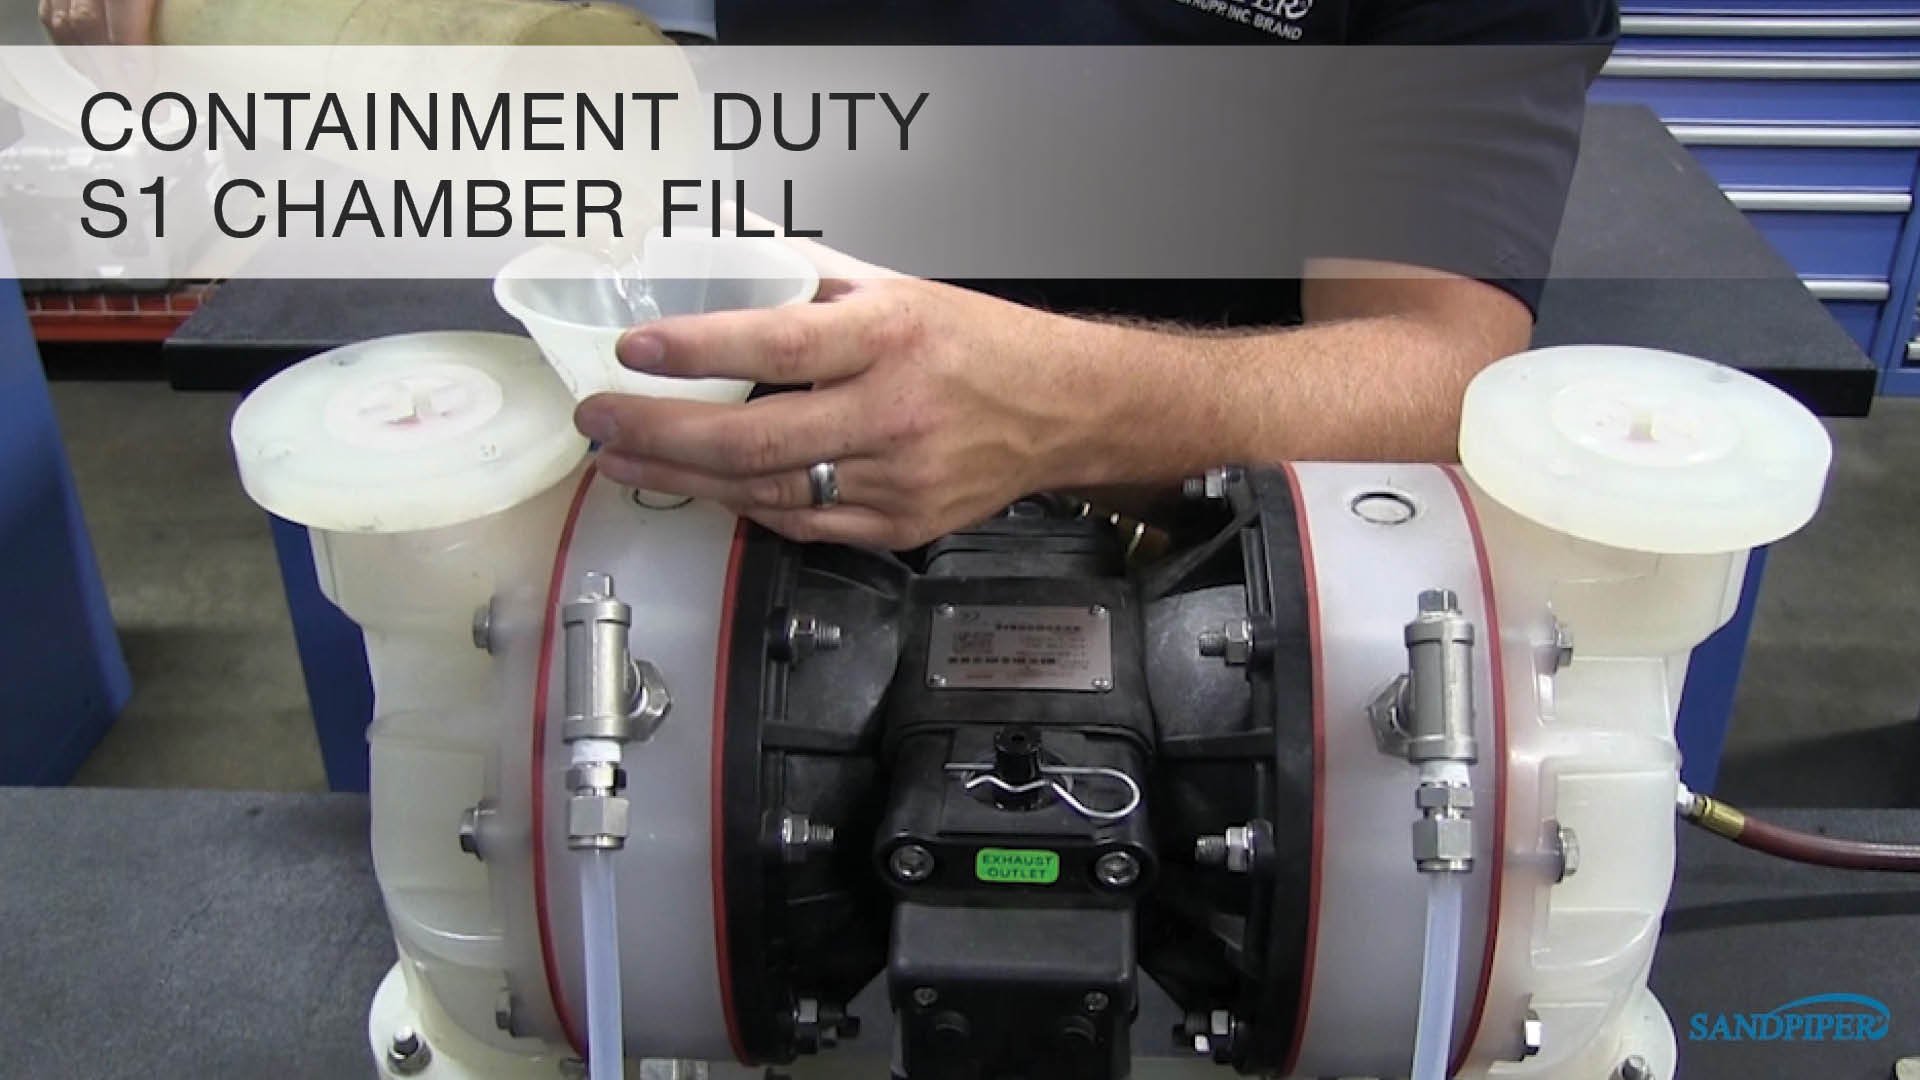 S1 Chamber Fill Containment Duty